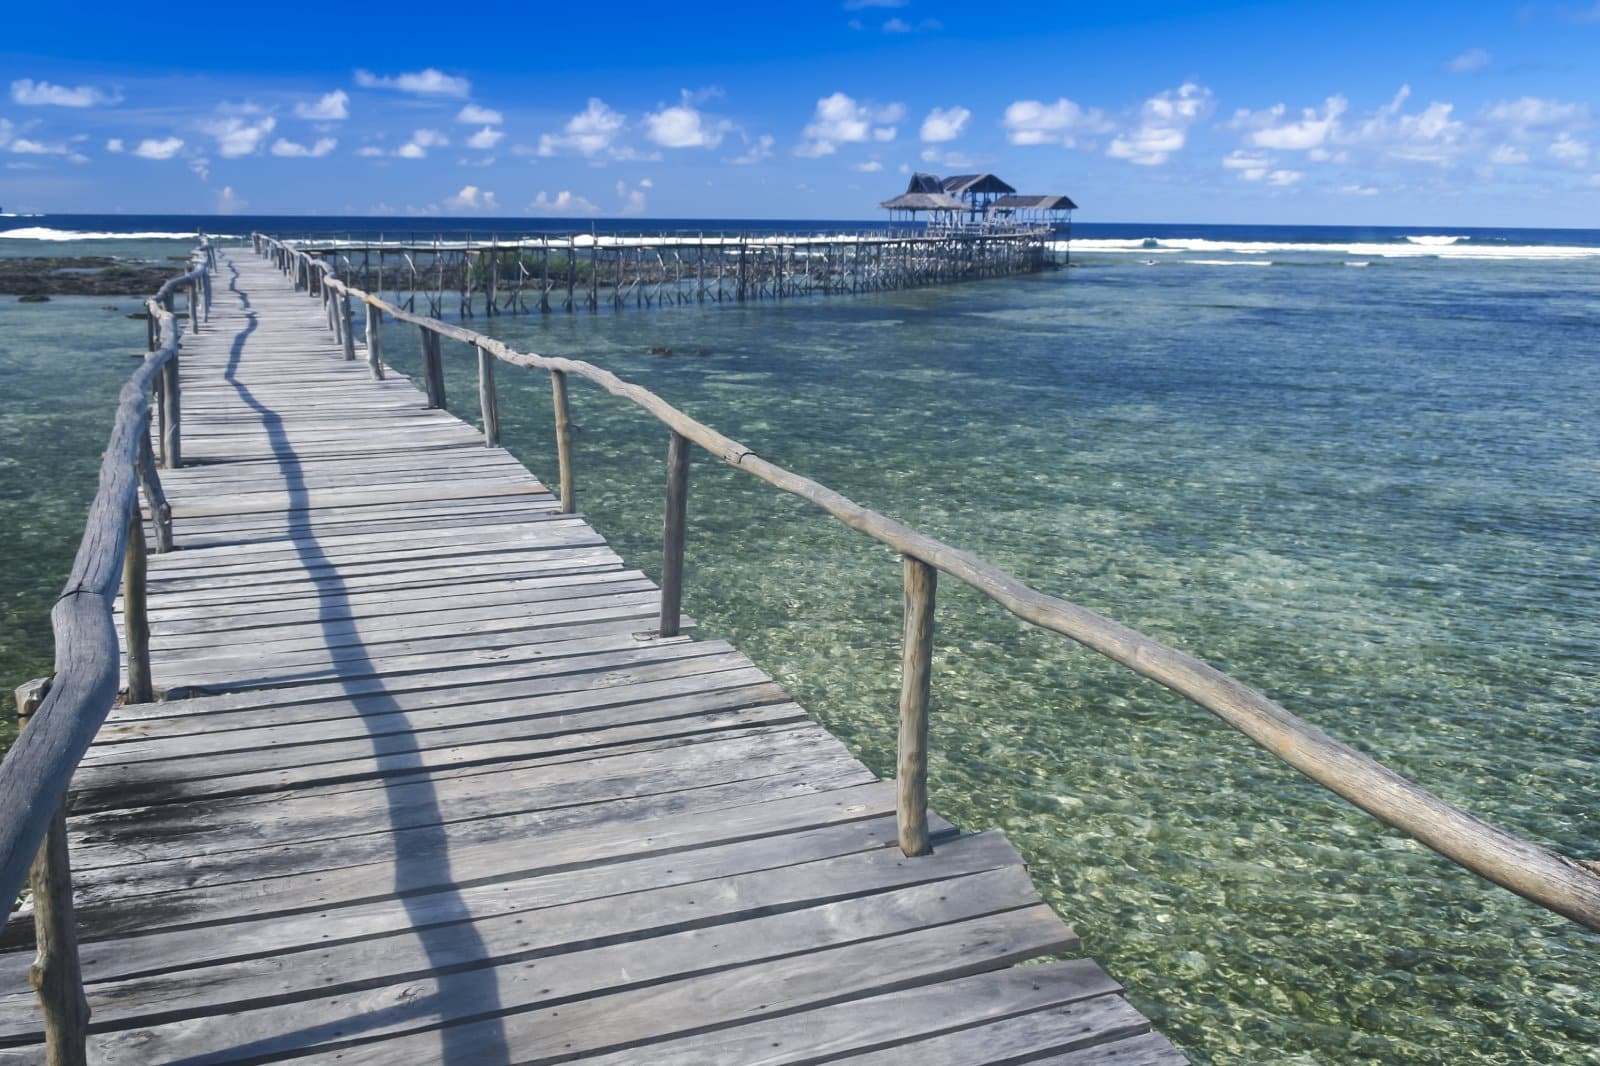 <p class="wp-caption-text">Image Credit: Shutterstock / donsimon</p>  <p><span>Siargao, located in the eastern Philippines, is a haven for surfers, with the famous Cloud 9 reef wave drawing enthusiasts from around the globe. Beyond its surf, Siargao offers a laid-back atmosphere, with stunning coconut palm-lined landscapes, clear tidal pools, and secluded white-sand beaches. The island also serves as a gateway to nearby islets, such as the enchanting lagoons of Sohoton Cove.</span></p>